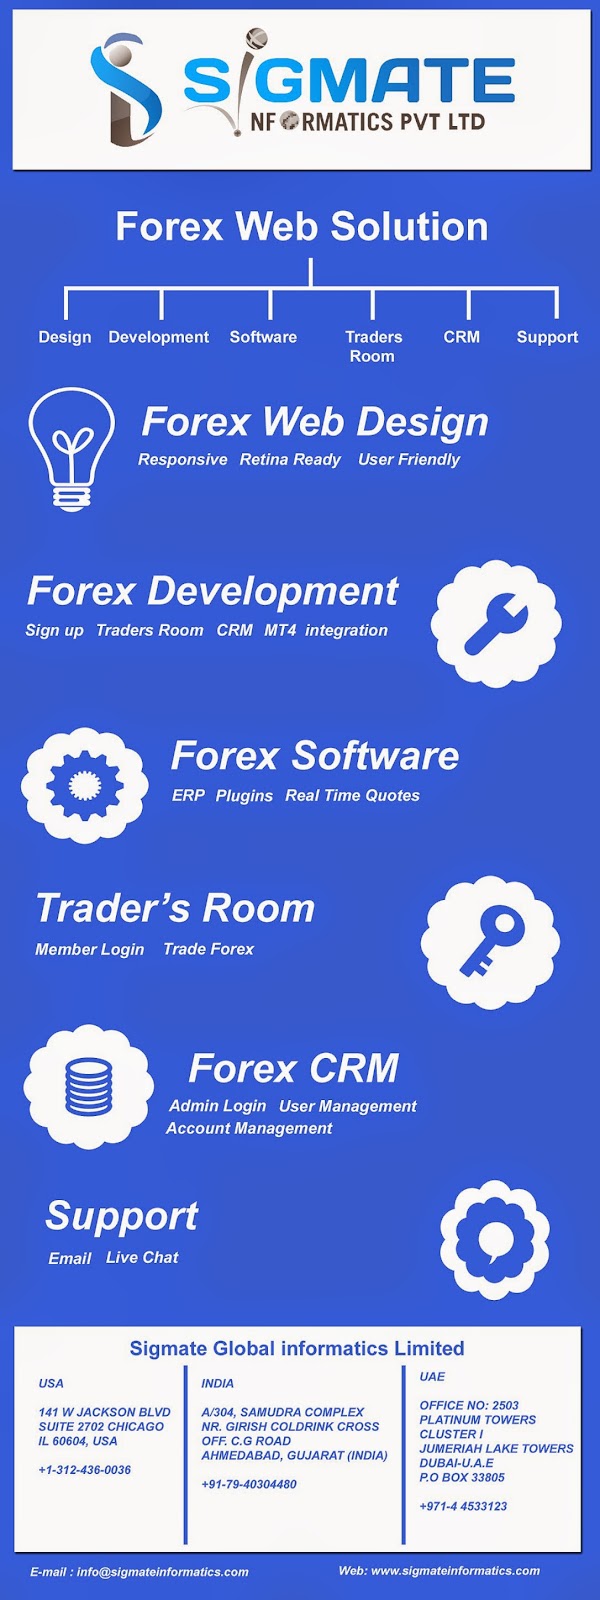 Forex Web Solution